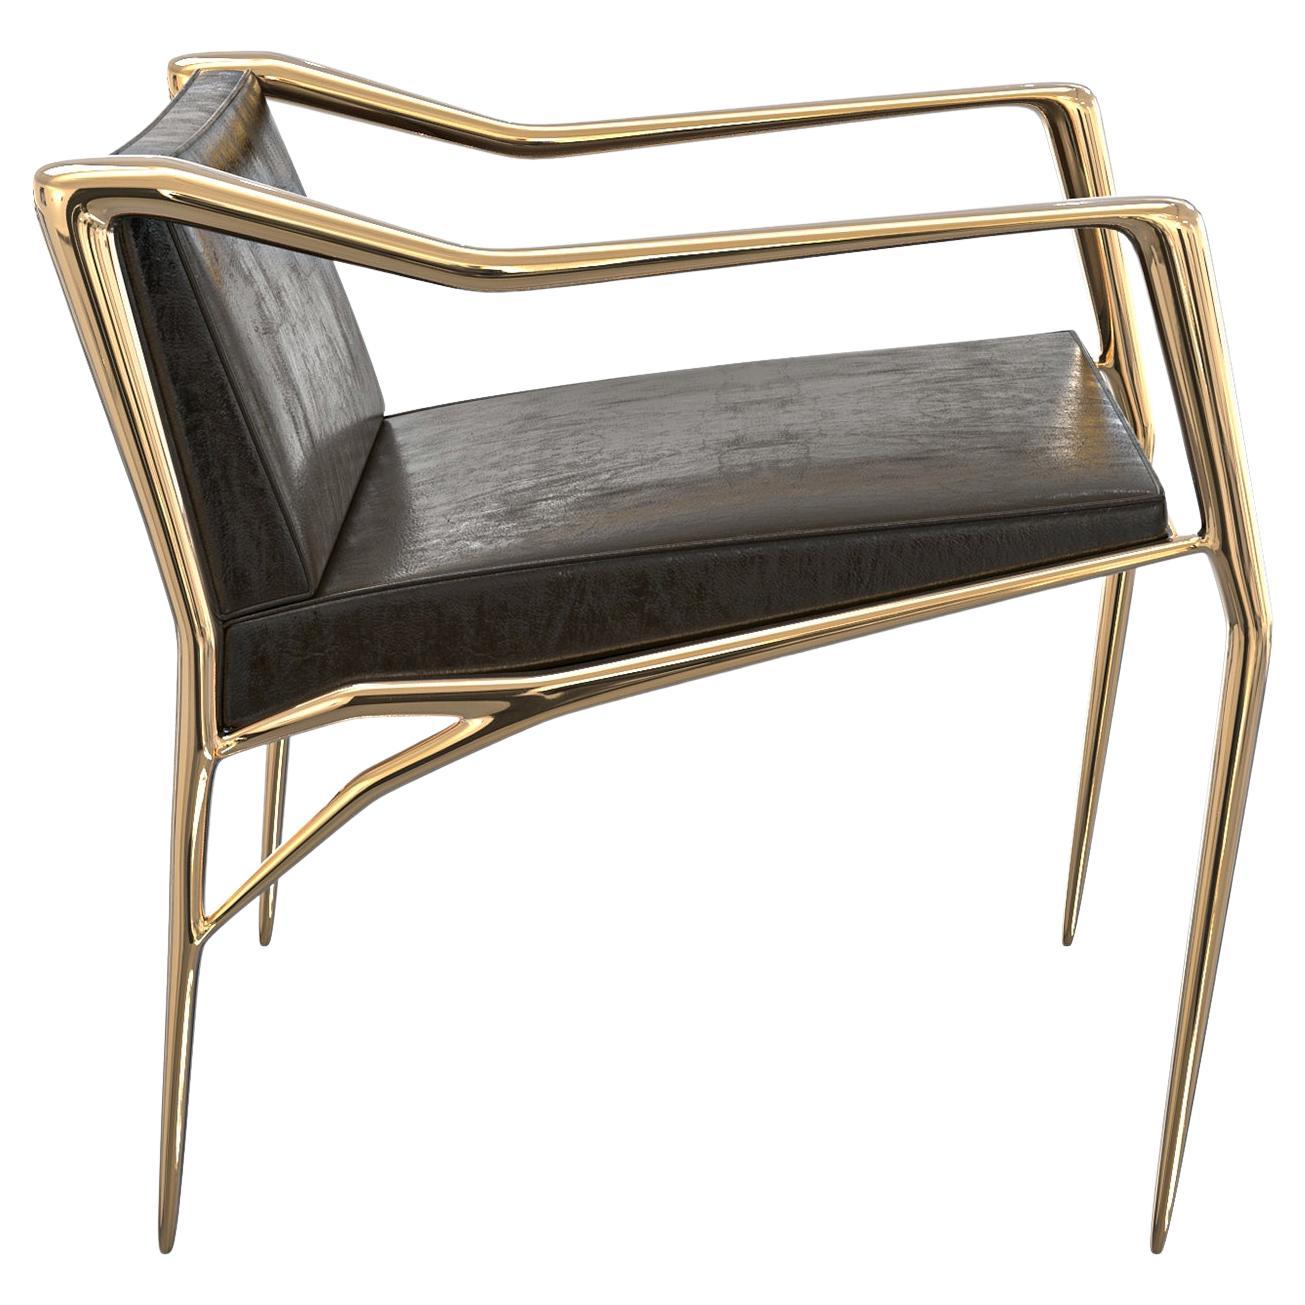 "Inizio" Dining Room Chair with Bronze and Tailor Made Leather For Sale